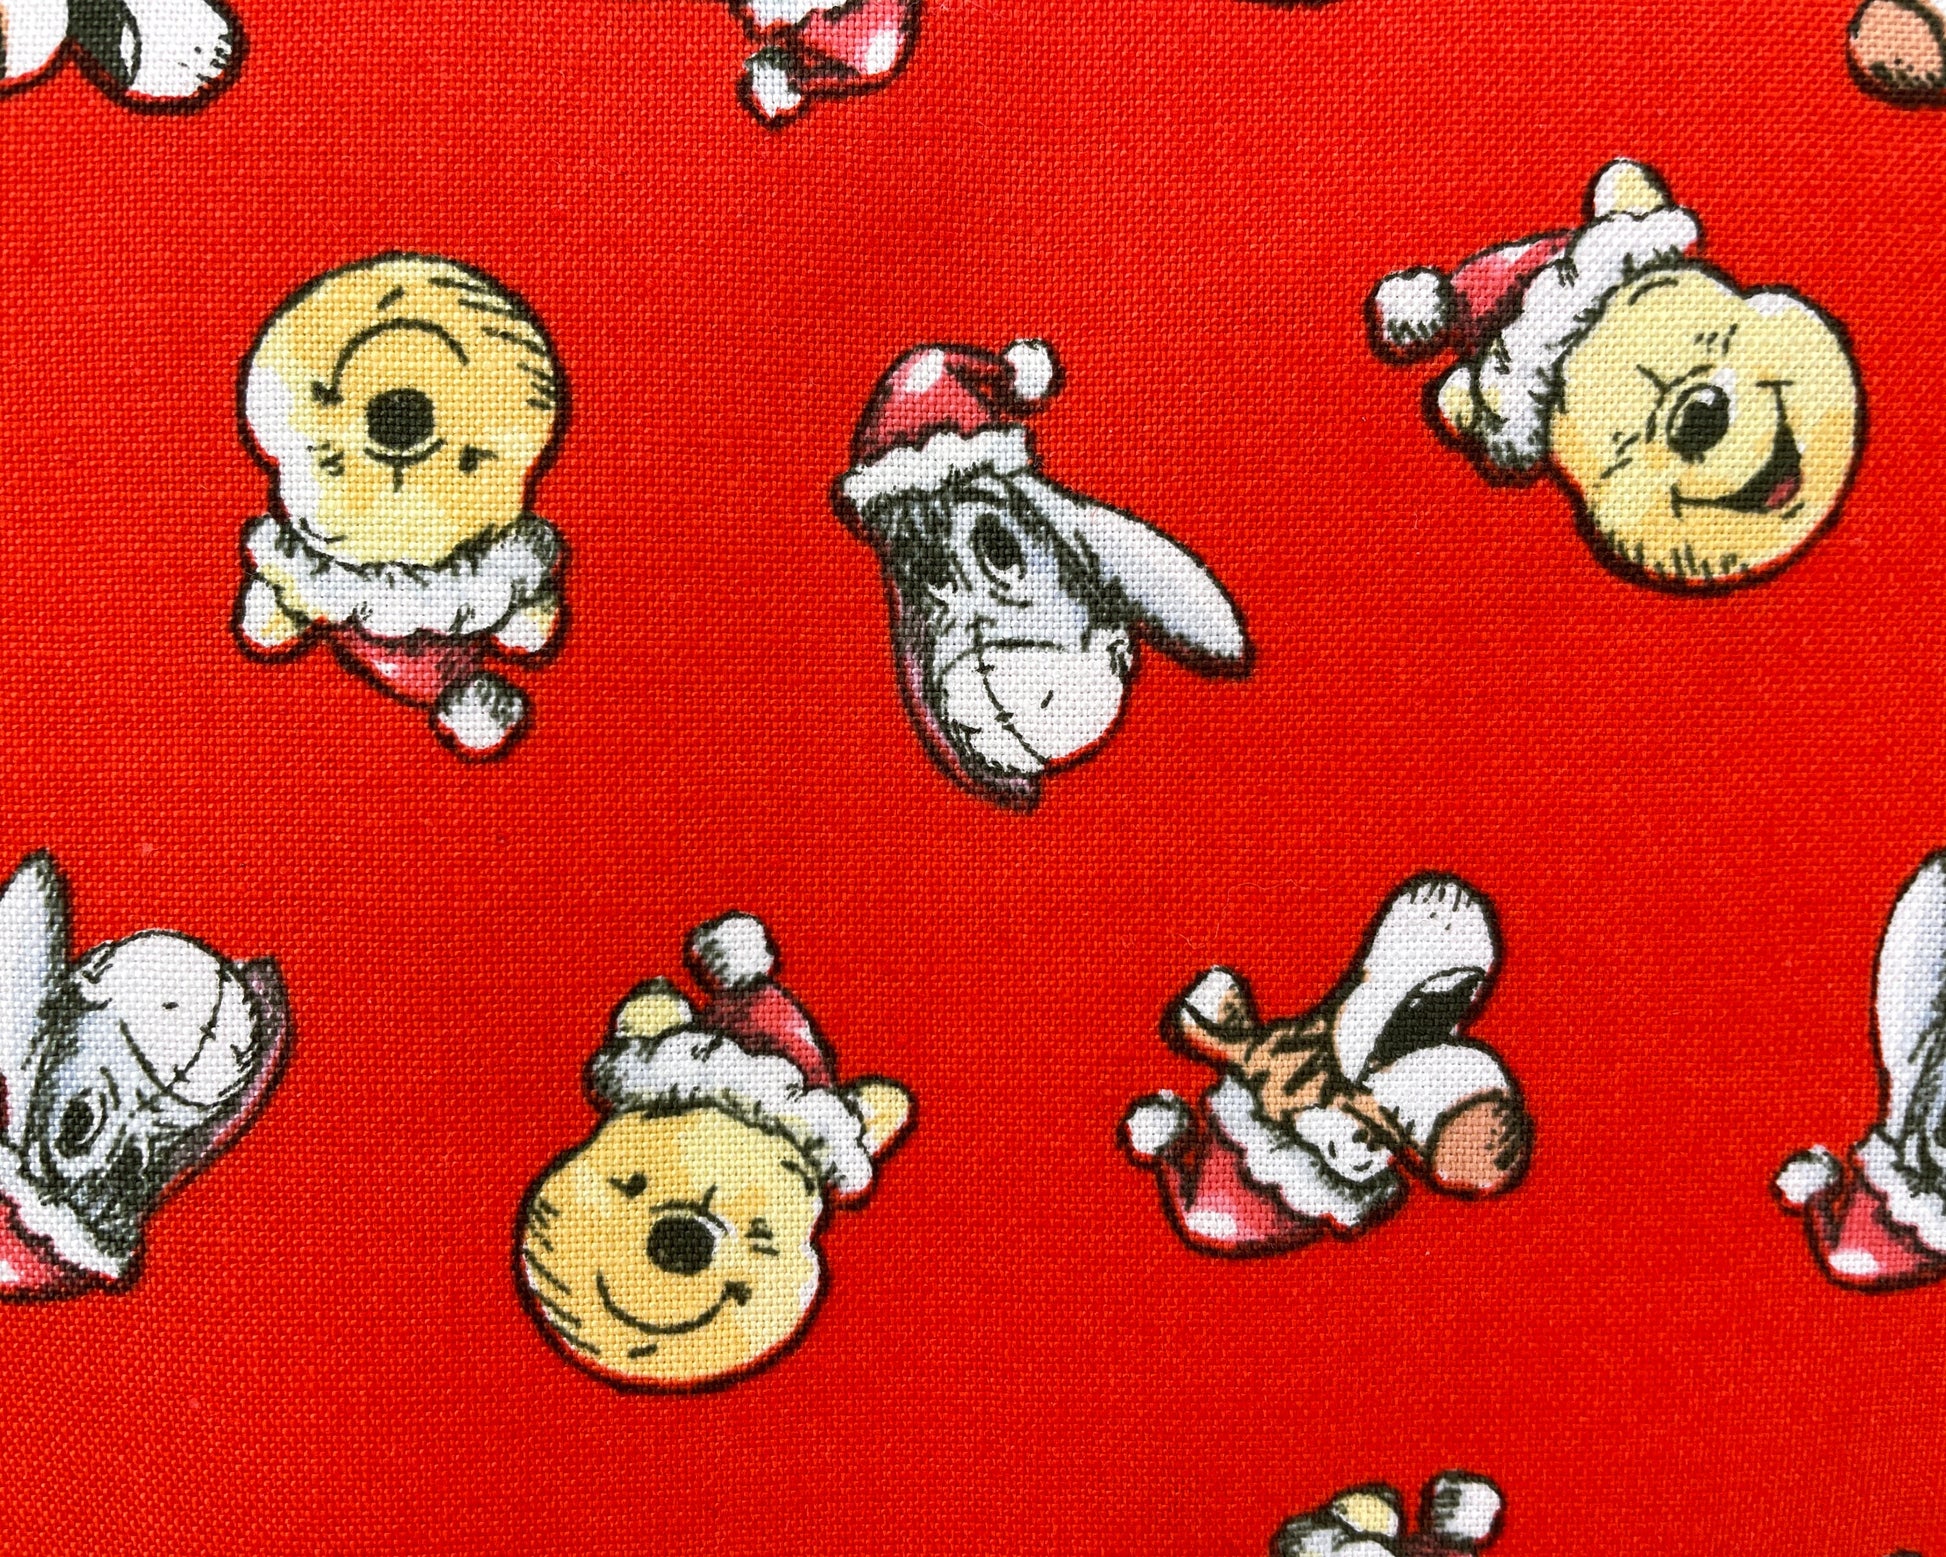 Winnie The Pooh Christmas fabric - Santa Hat Toss - Winnie the Pooh Christmas Holiday Disney Fabric - 100% cotton - Camelot - SHIPS NEXT DAY